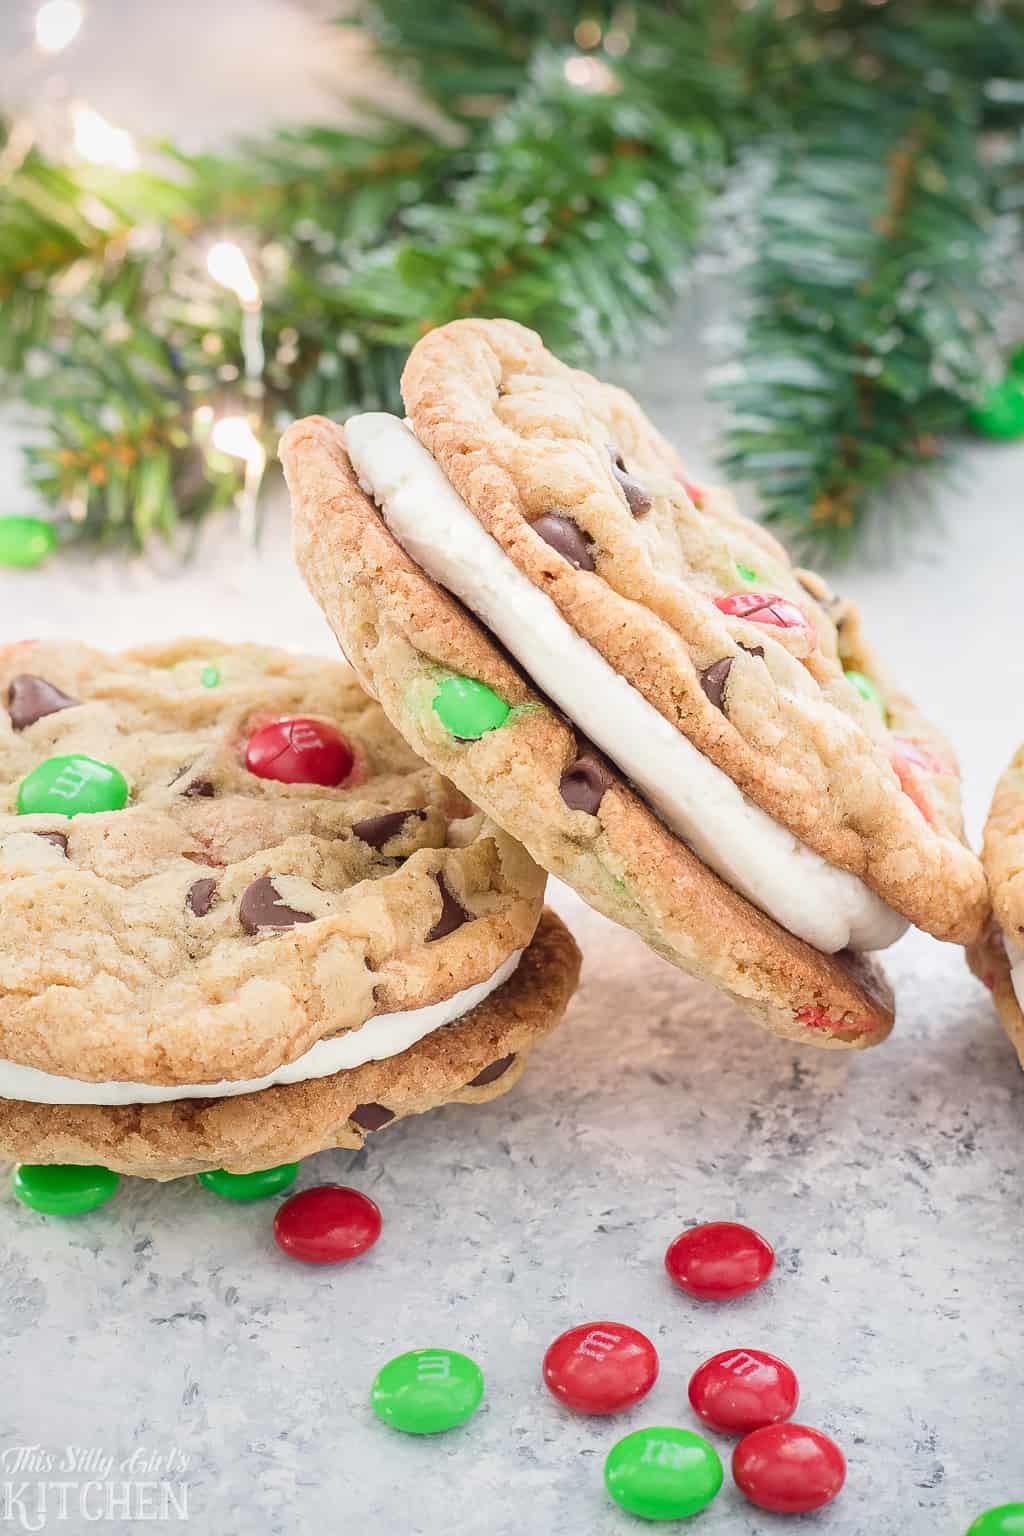 Christmas Cookie Sandwiches, the fluffiest buttercream frosting sandwiched between two soft and chewy chocolate chip cookies loaded with holiday M&M's! #Recipe from ThisSillyGirlsKitchen.com #ChristmasCookies #SandwichCookies #CookiesForSanta #Christmas